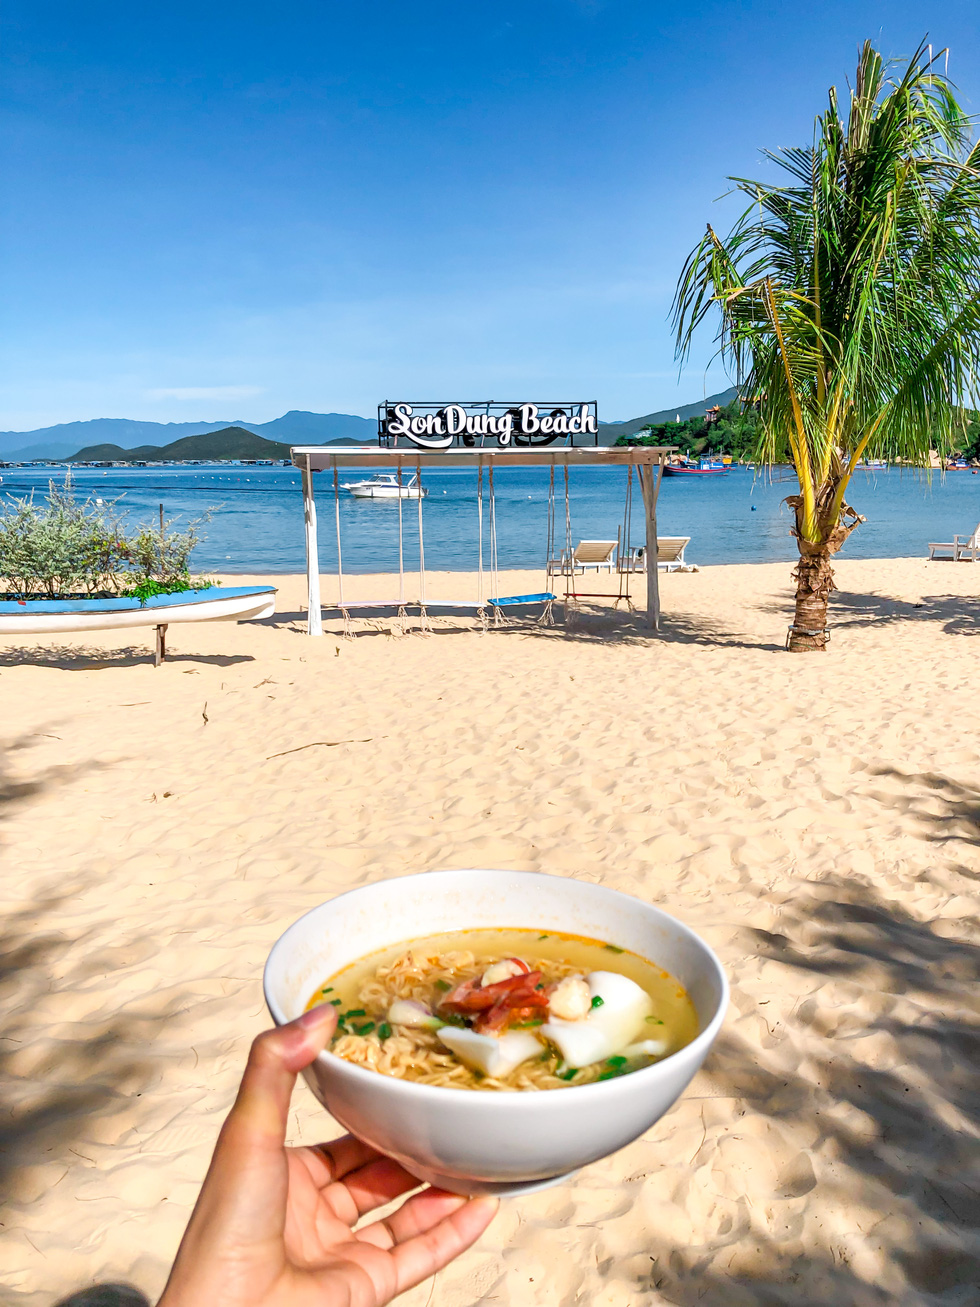 Apart from its turquoise water and white sand, local seafood available in Son Dung is mouth-watering. Sitting on the beach, breathing salt air and breeze, and enjoying local seafood are worth a try for those visiting Son Dung. Photo: Hoang Thuy Duong